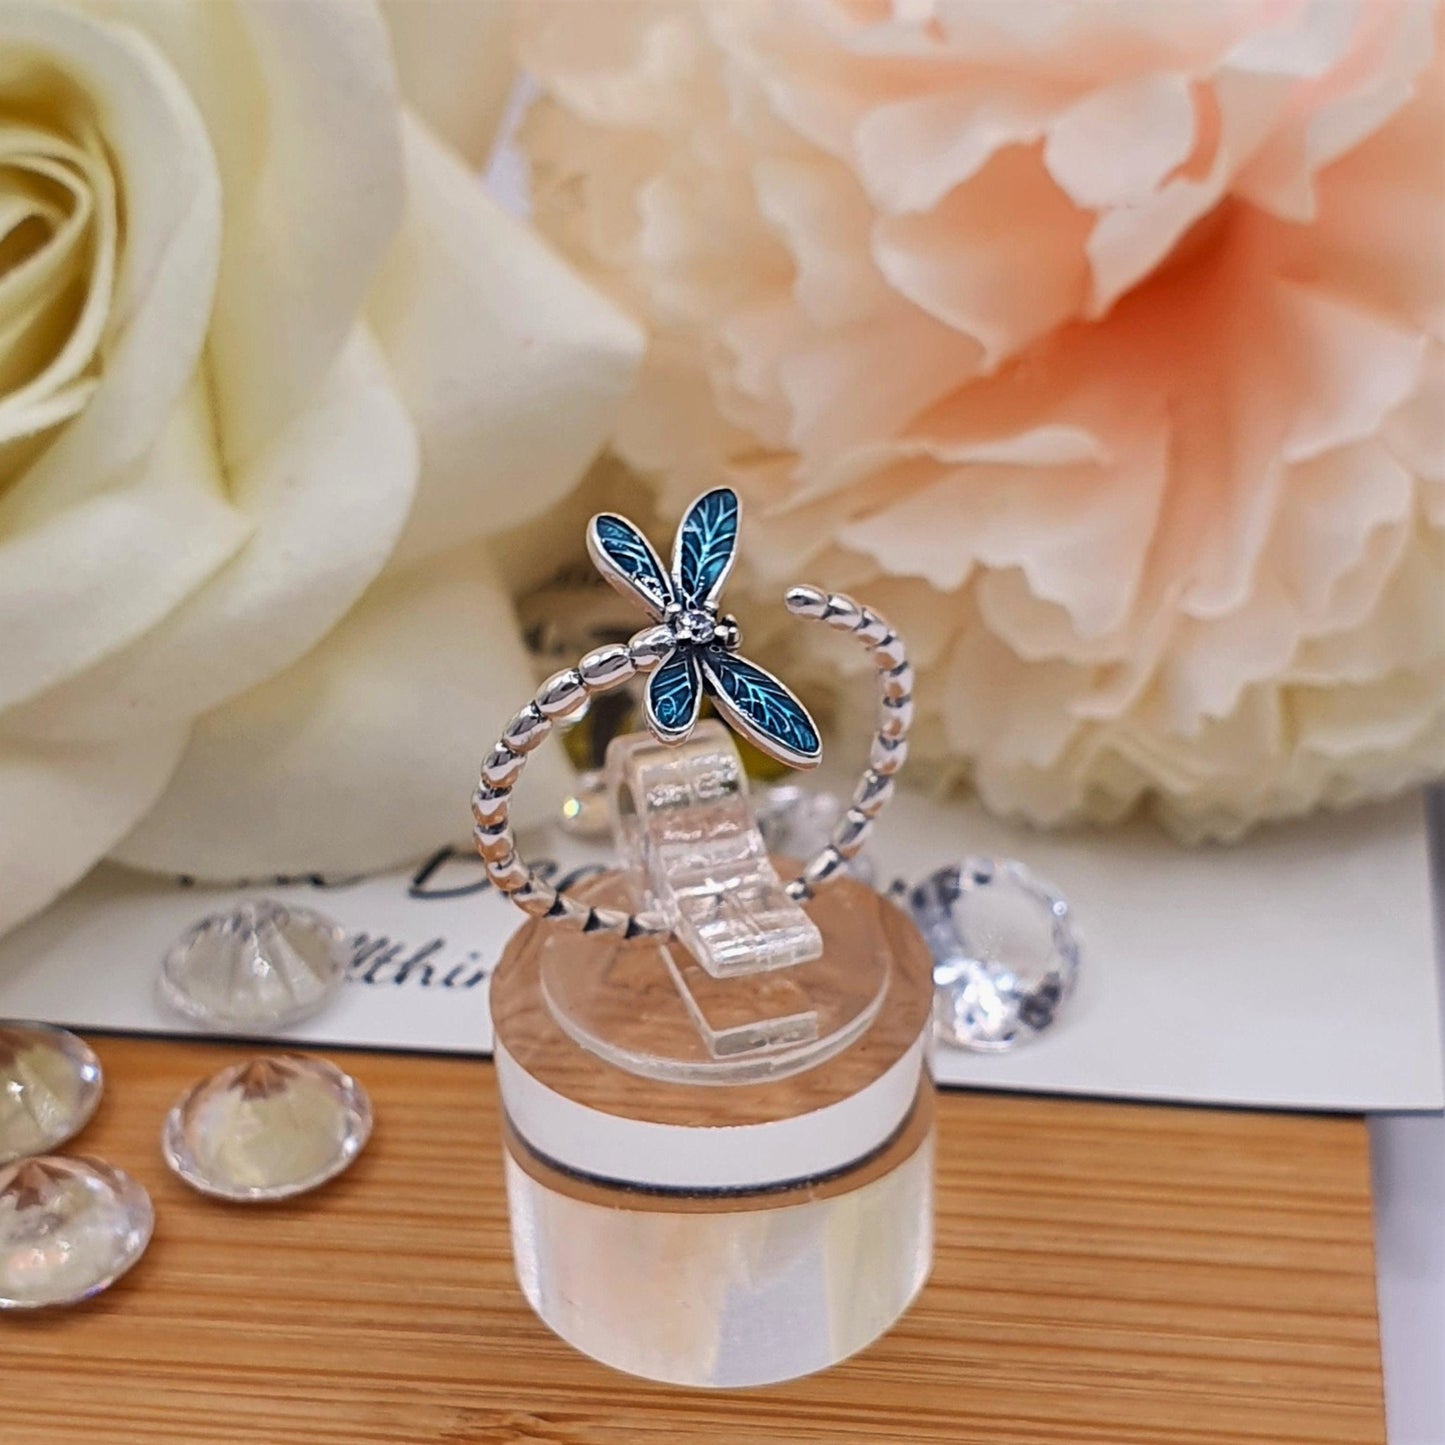 Teal Dragonfly Ring - The Bee Charm